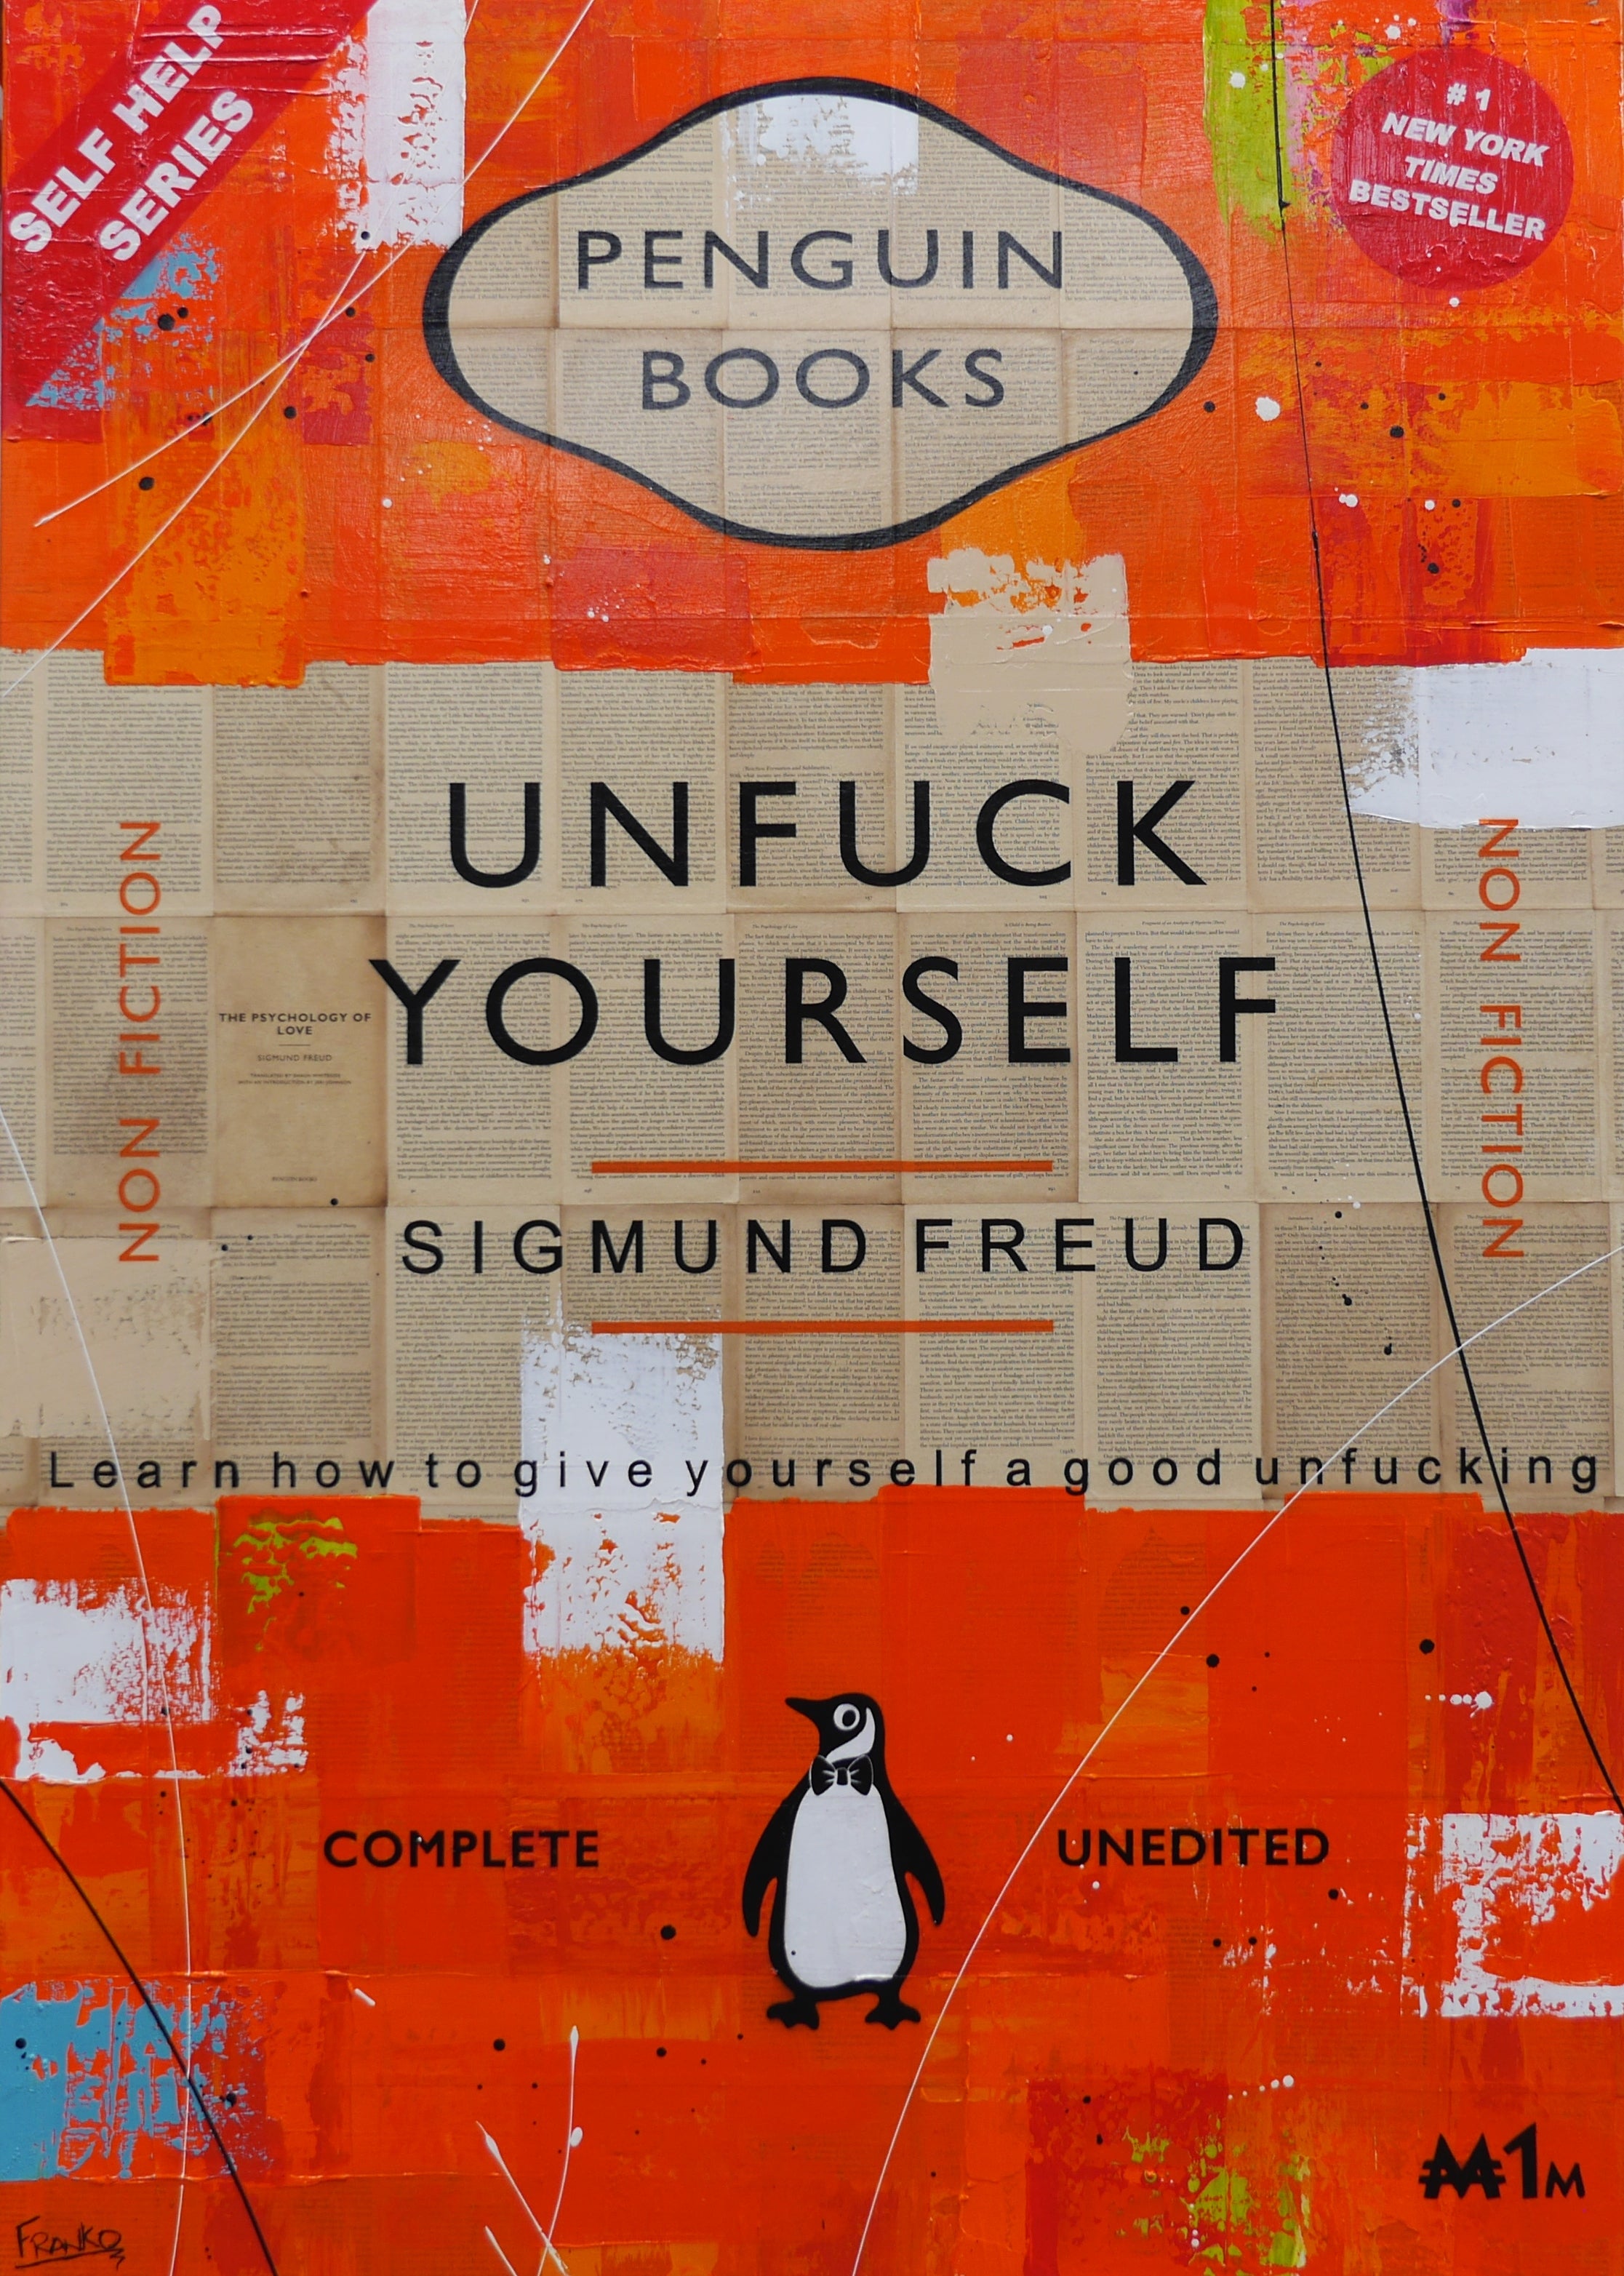 Completely Unfucked 140cm x 100cm Unfuck Yourself Urban Pop Book Club Painting (SOLD)